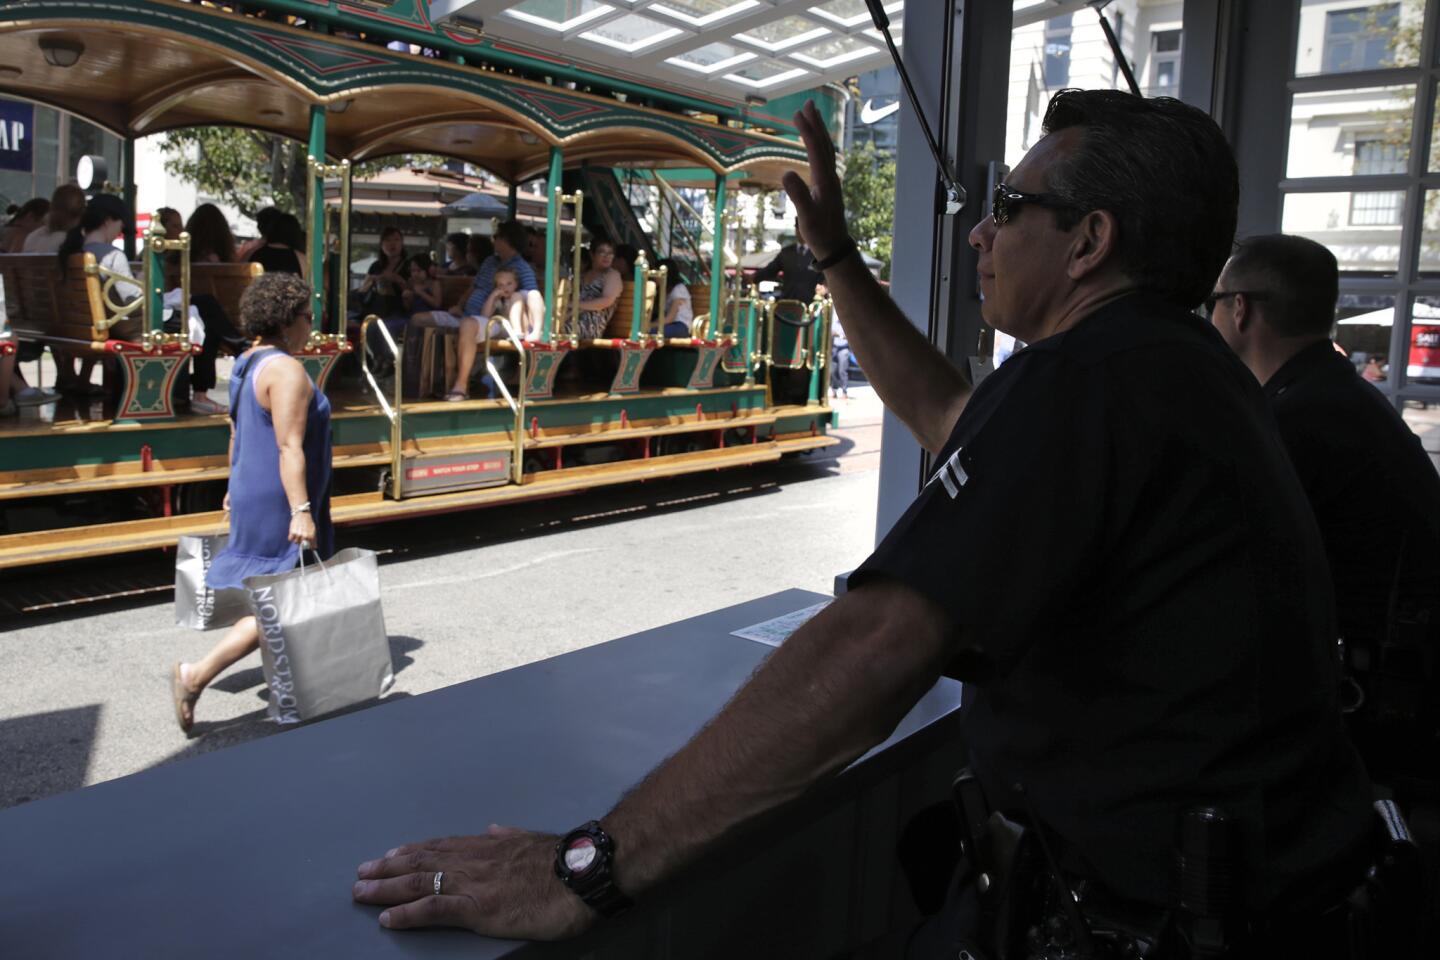 Los Angeles Police Officers Michael Acosta, left, and Thomas McClaughlin watch over the Grove shopping center from a police kiosk.